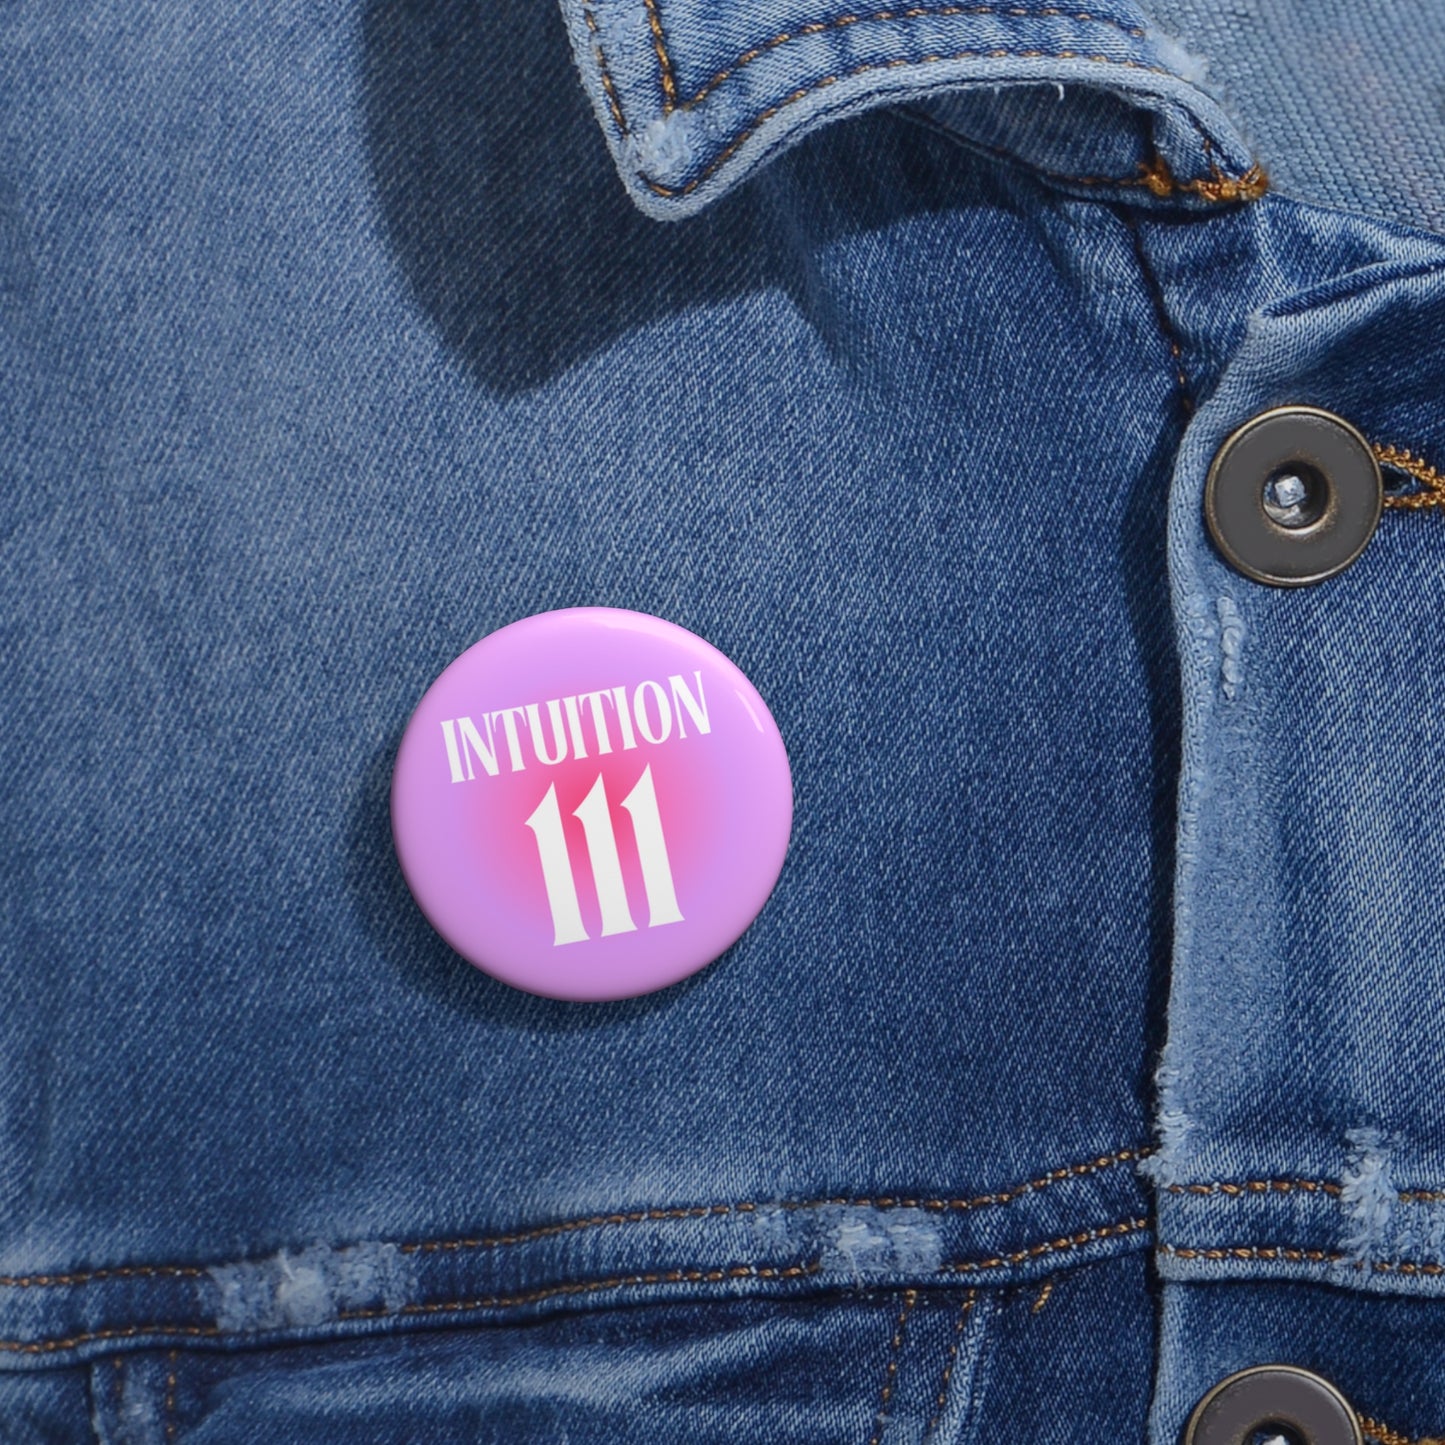 111 Pin Buttons